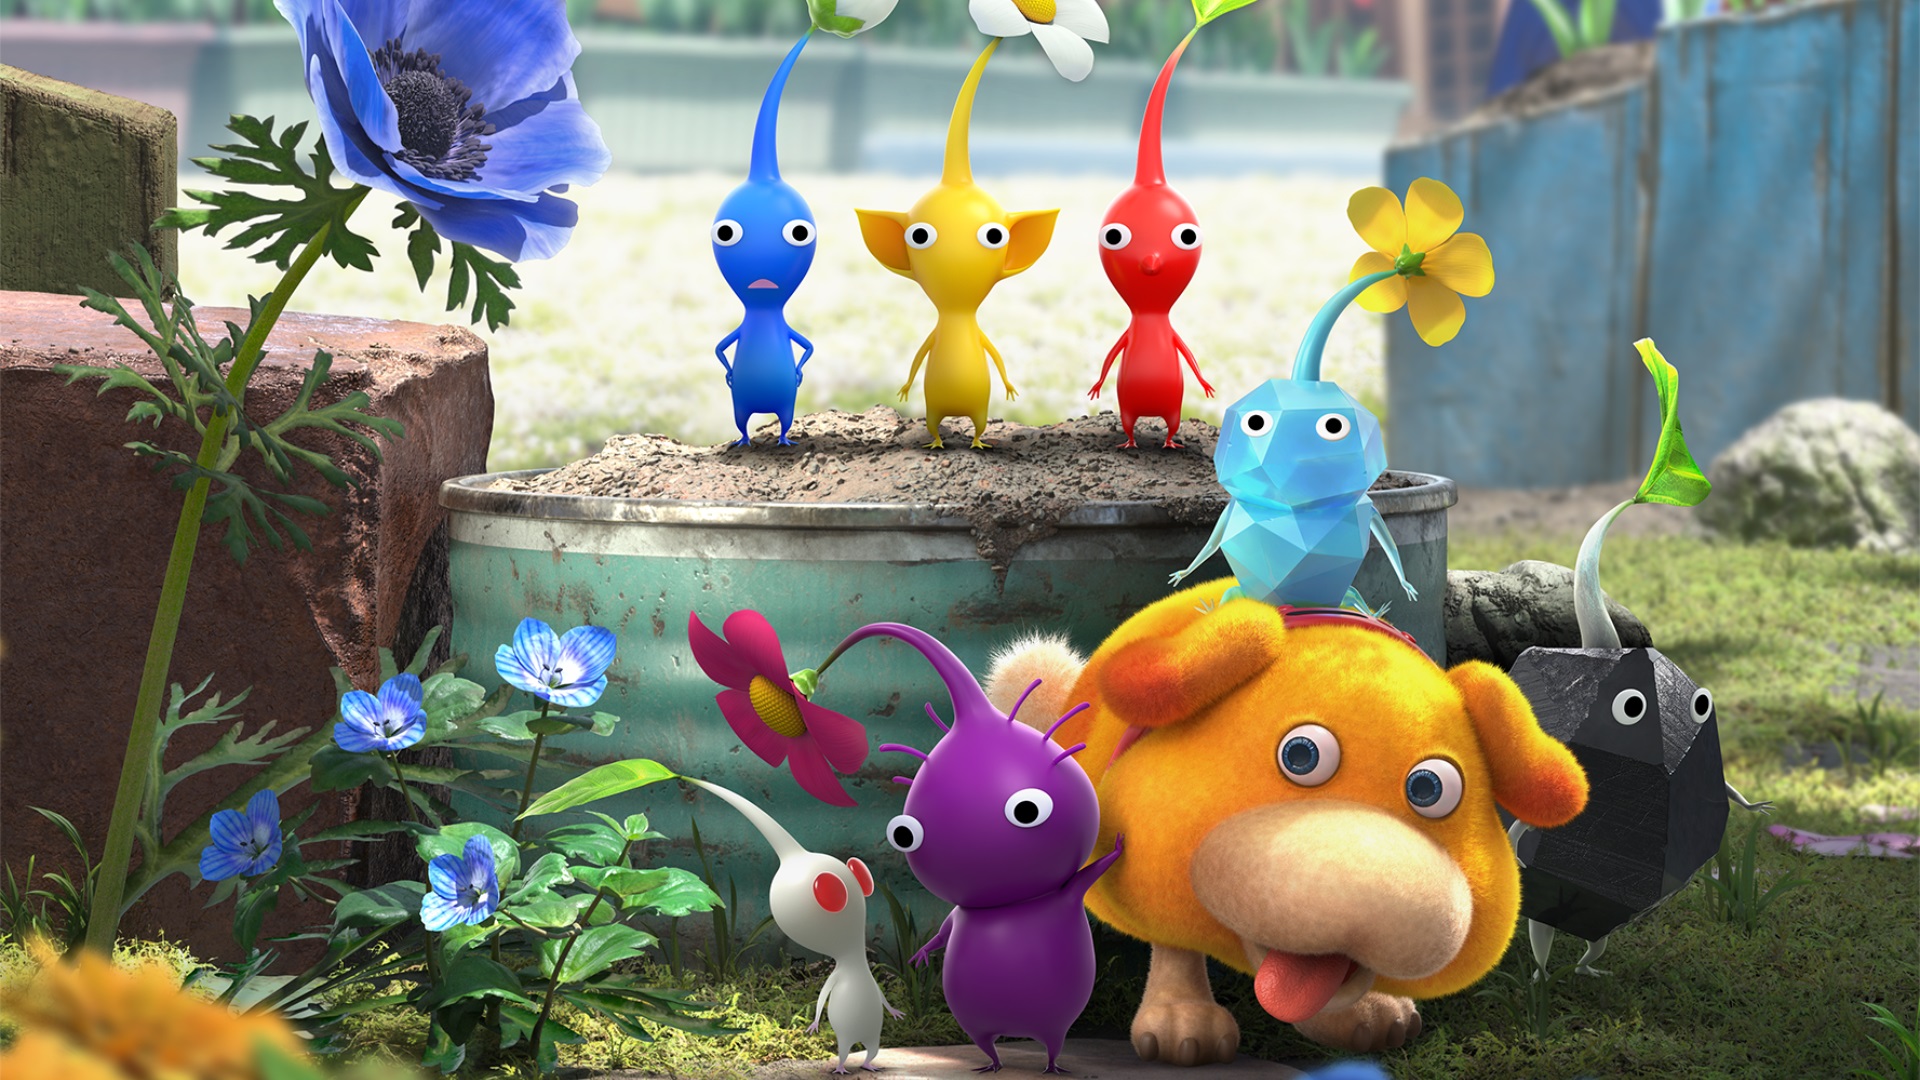 Pikmin 4 on Switch: release date, trailer, gameplay and more | TechRadar